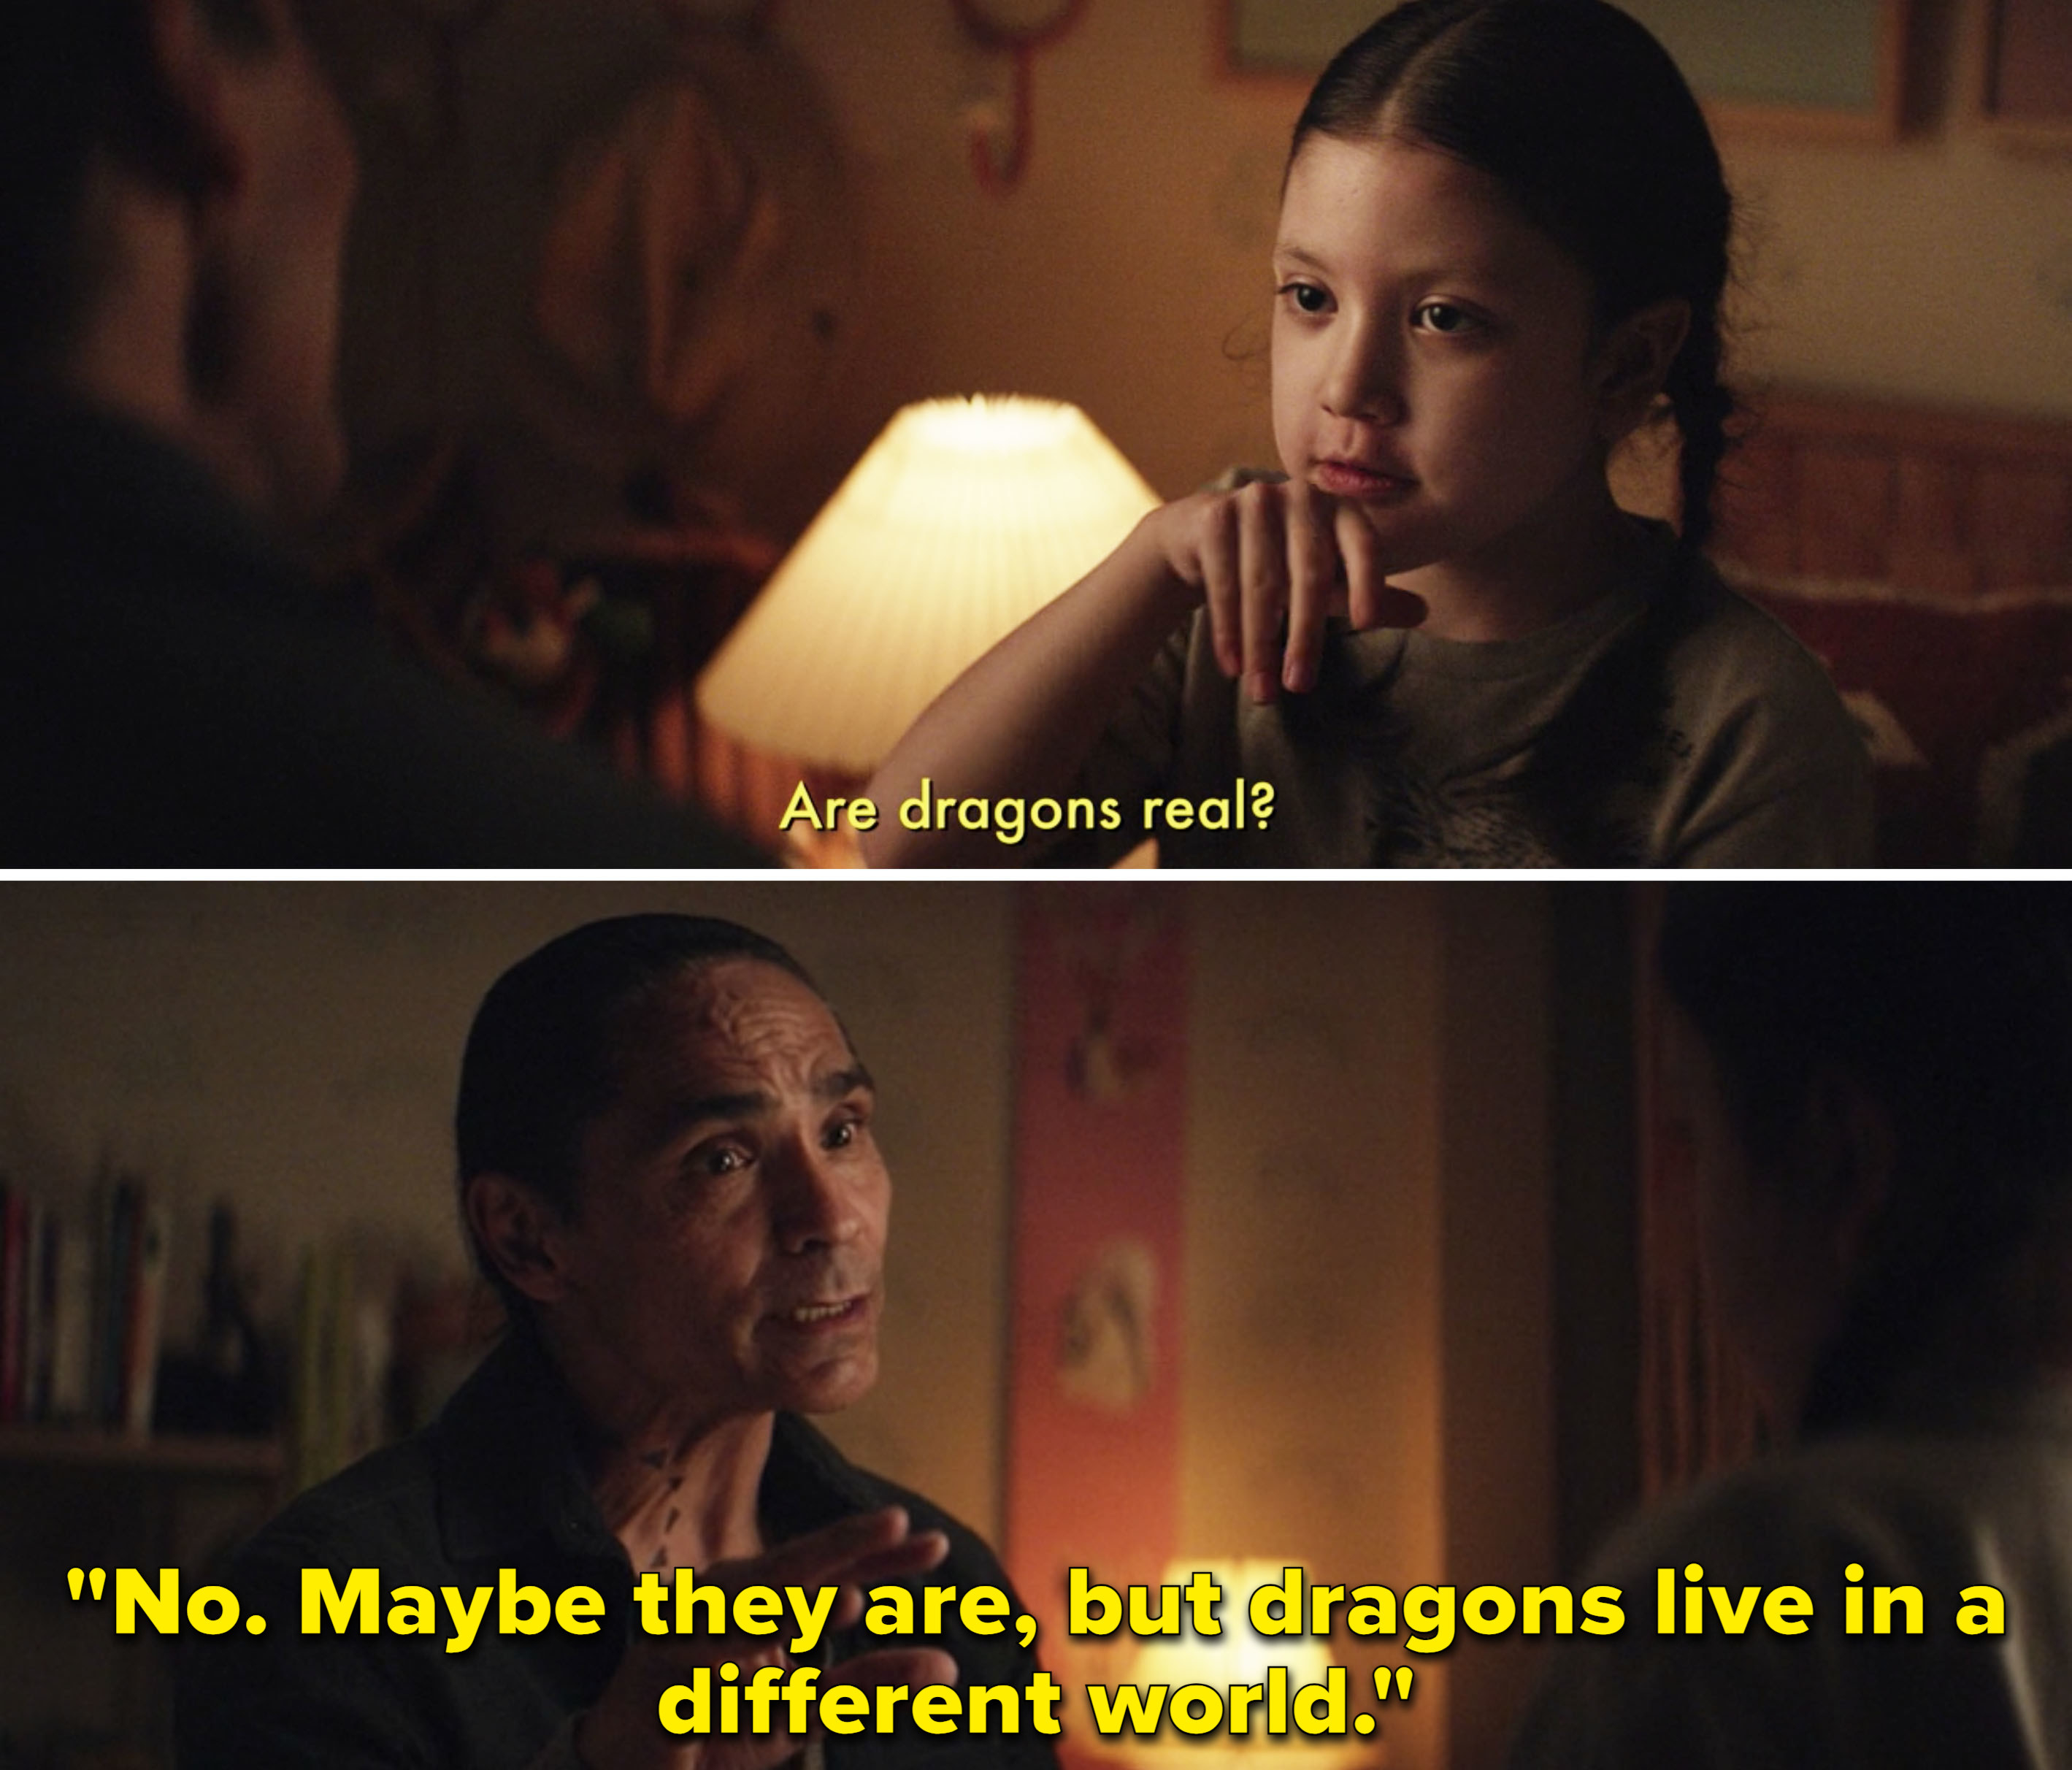 Maya&#x27;s dad saying &quot;Maybe they are, but dragons live in a different world&quot;